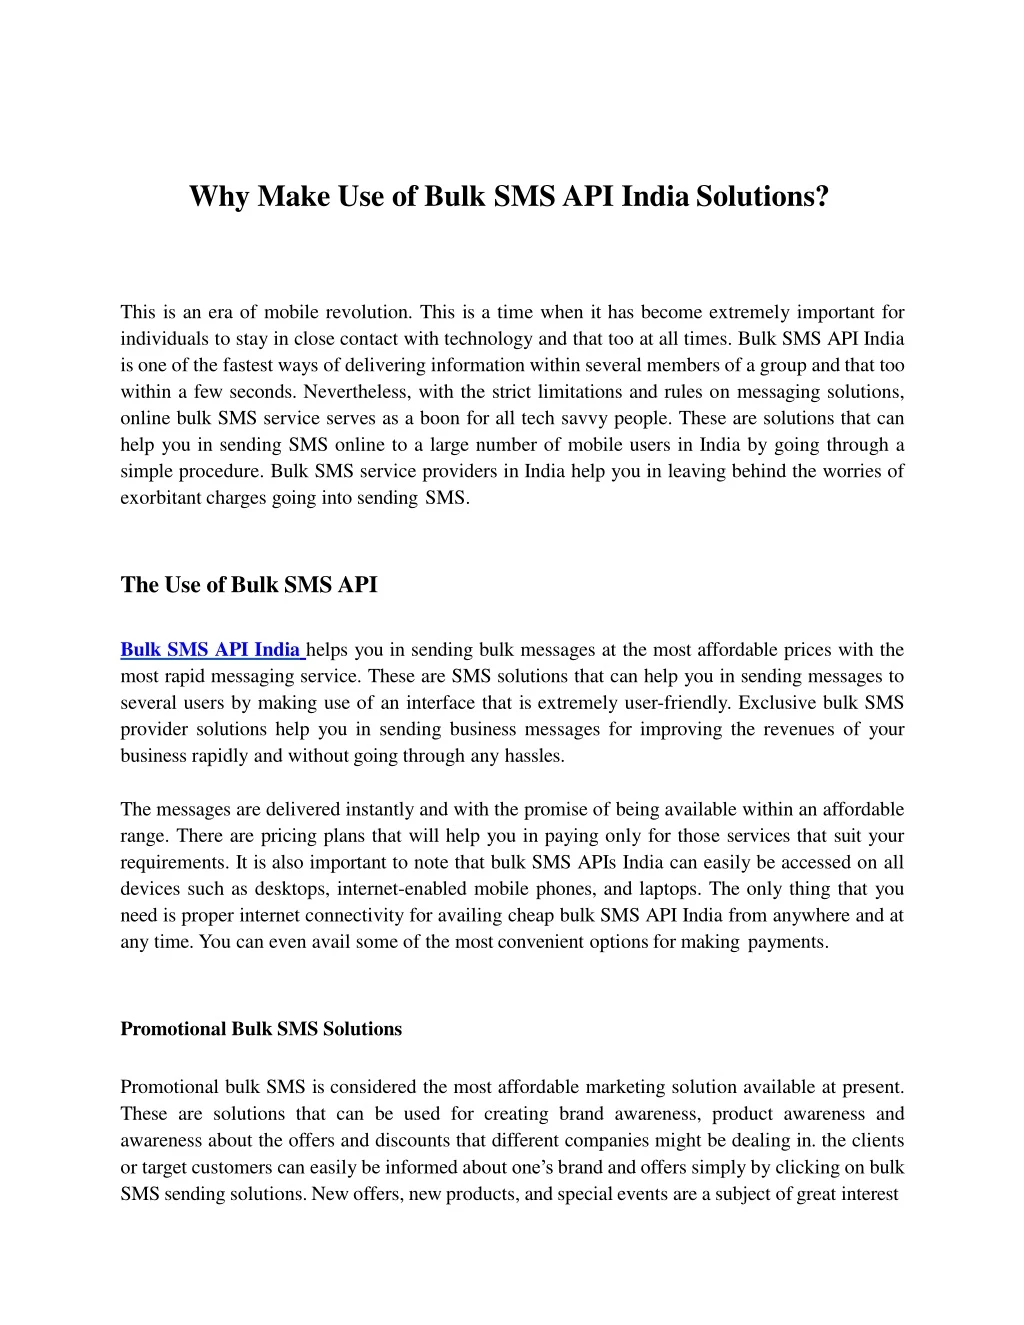 why make use of bulk sms api india solutions